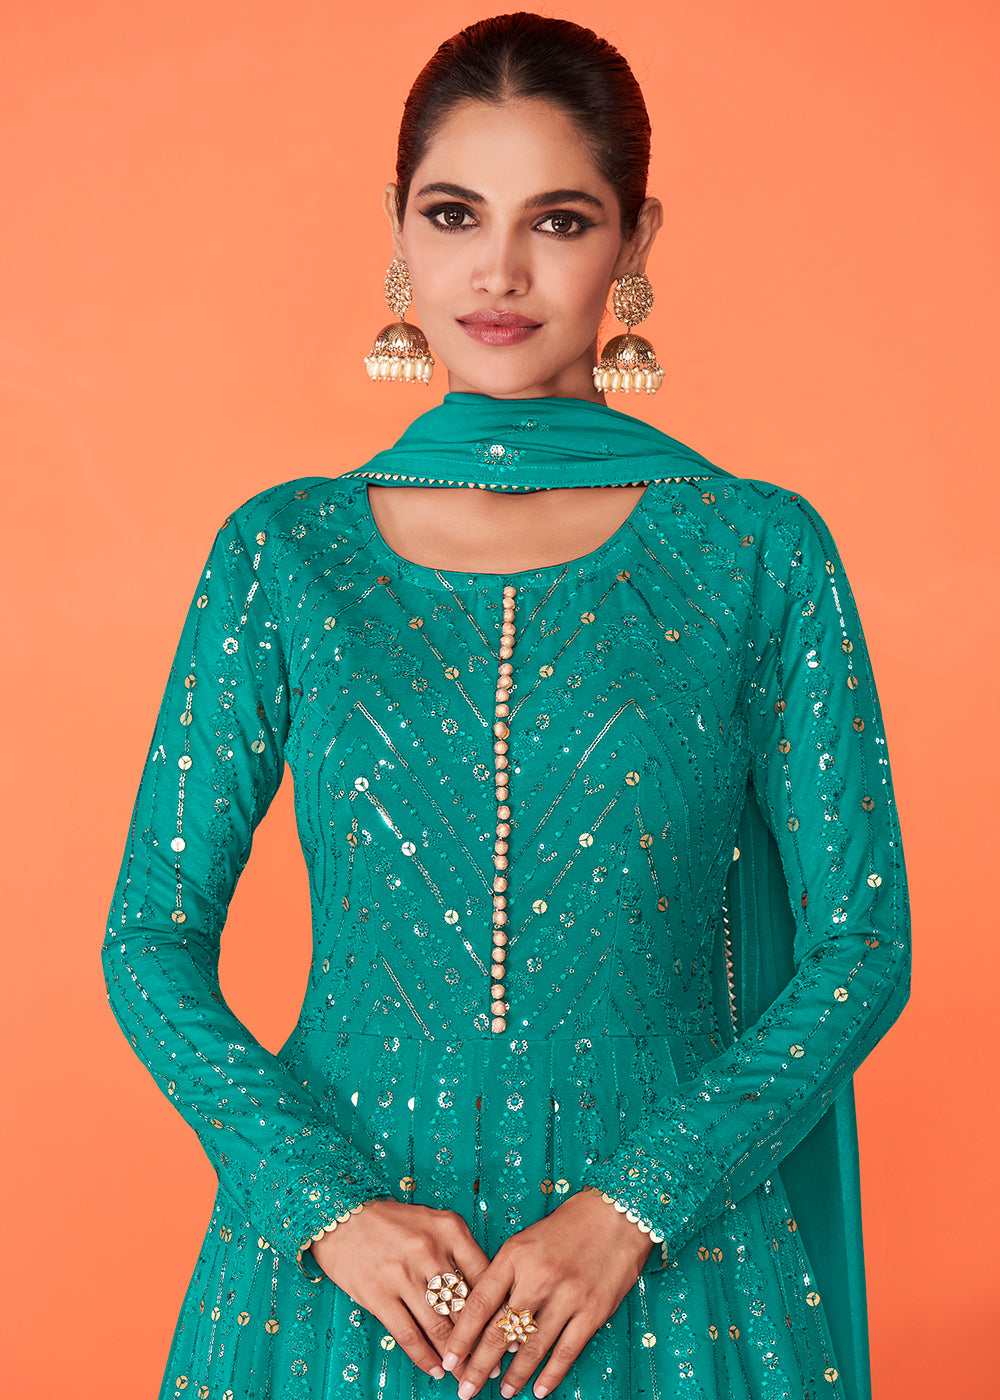 Shop Now Majestic Turquoise Georgette Festive Anarkali Suit Online featuring Vartika Singh at Empress Clothing in USA